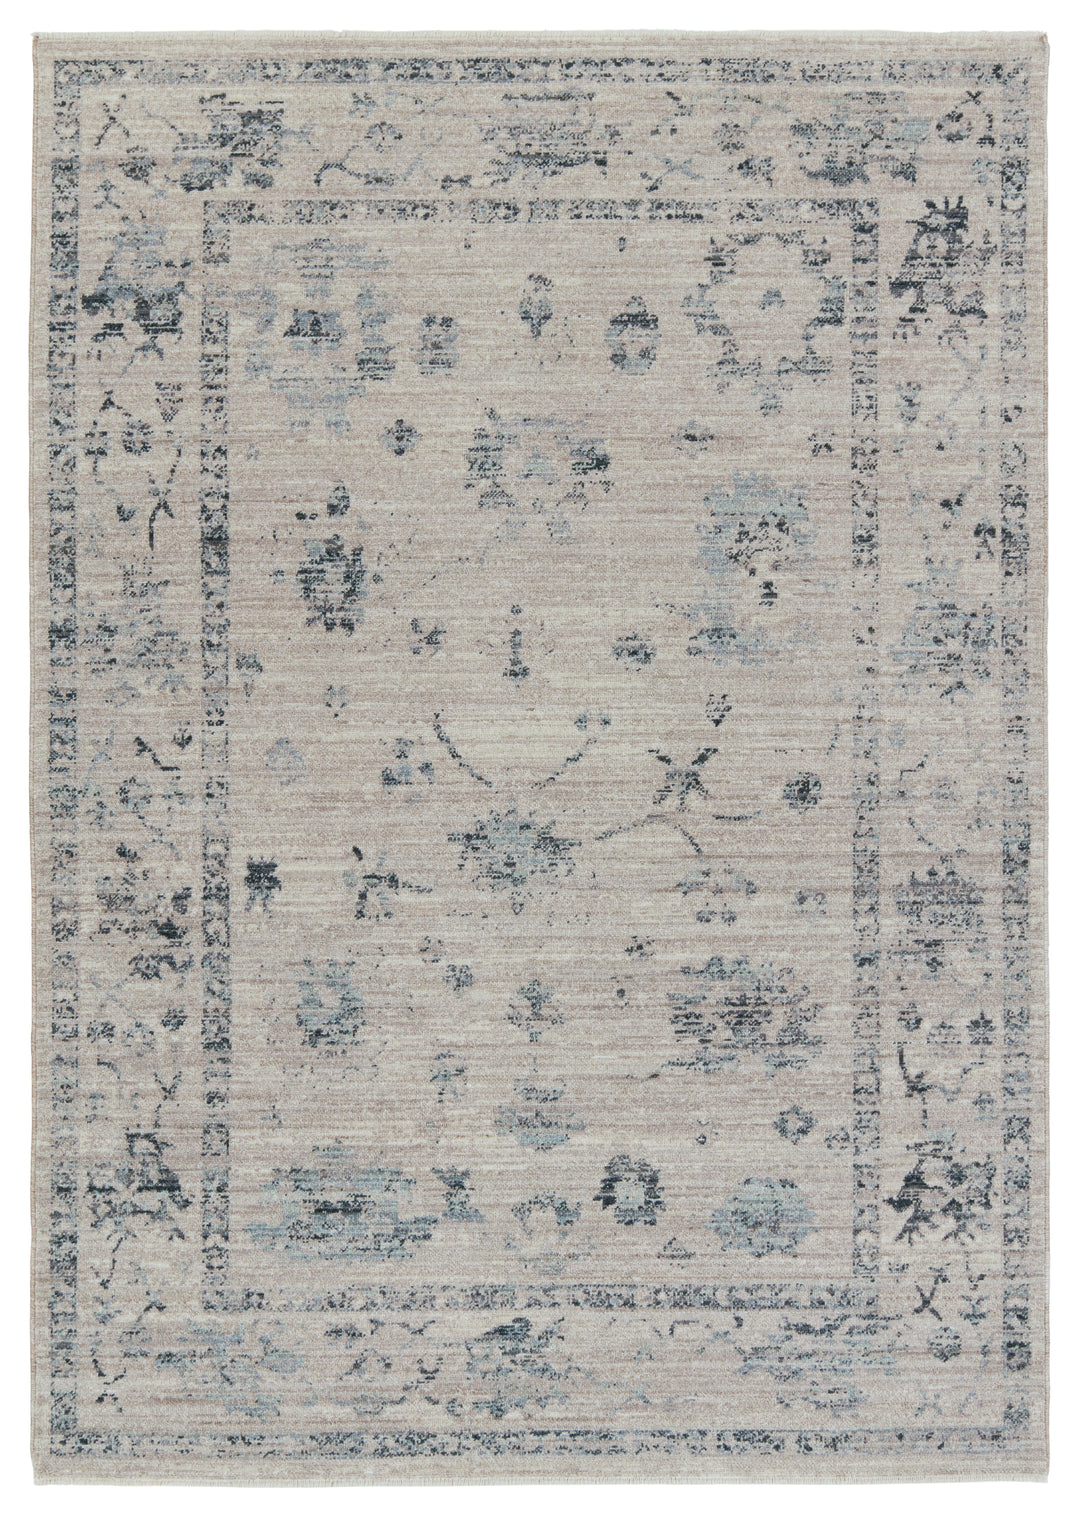 Vibe by Jaipur Living Adelaide Floral Blue/ Gray Area Rug (LEILA - LEI01)